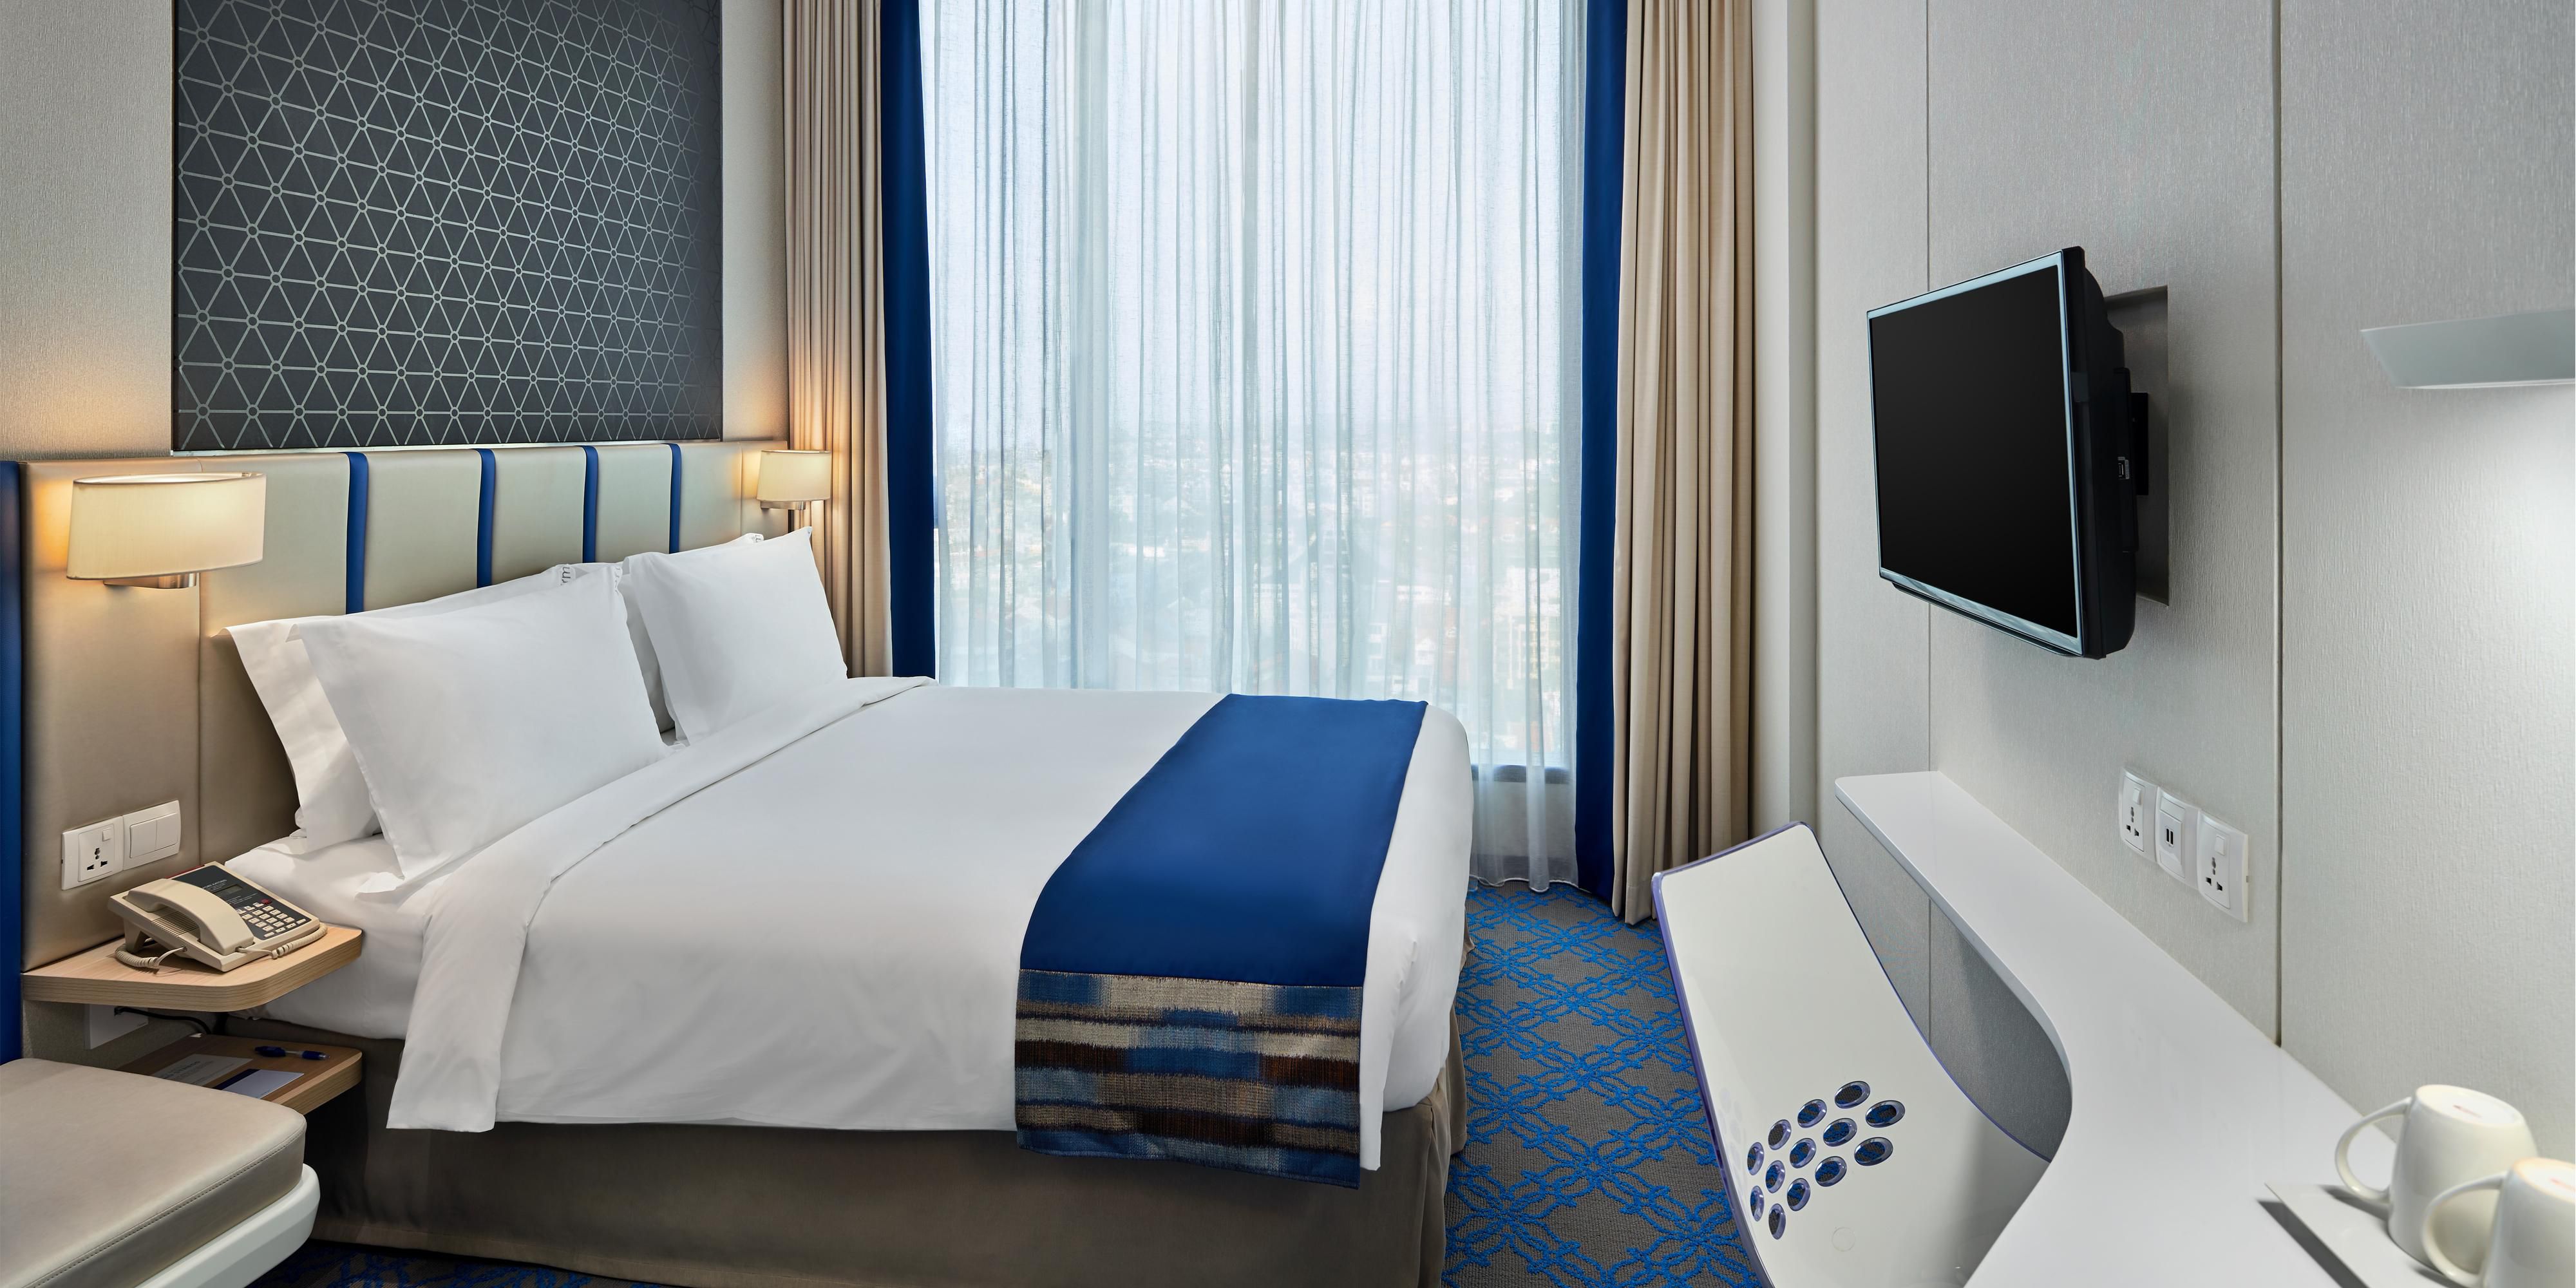 Simple, Smart travel is relaxing and recharging in our contemporary styled rooms with signature bedding, crisp white linen & a choice of soft & frim pillows that assures a good night sleep.